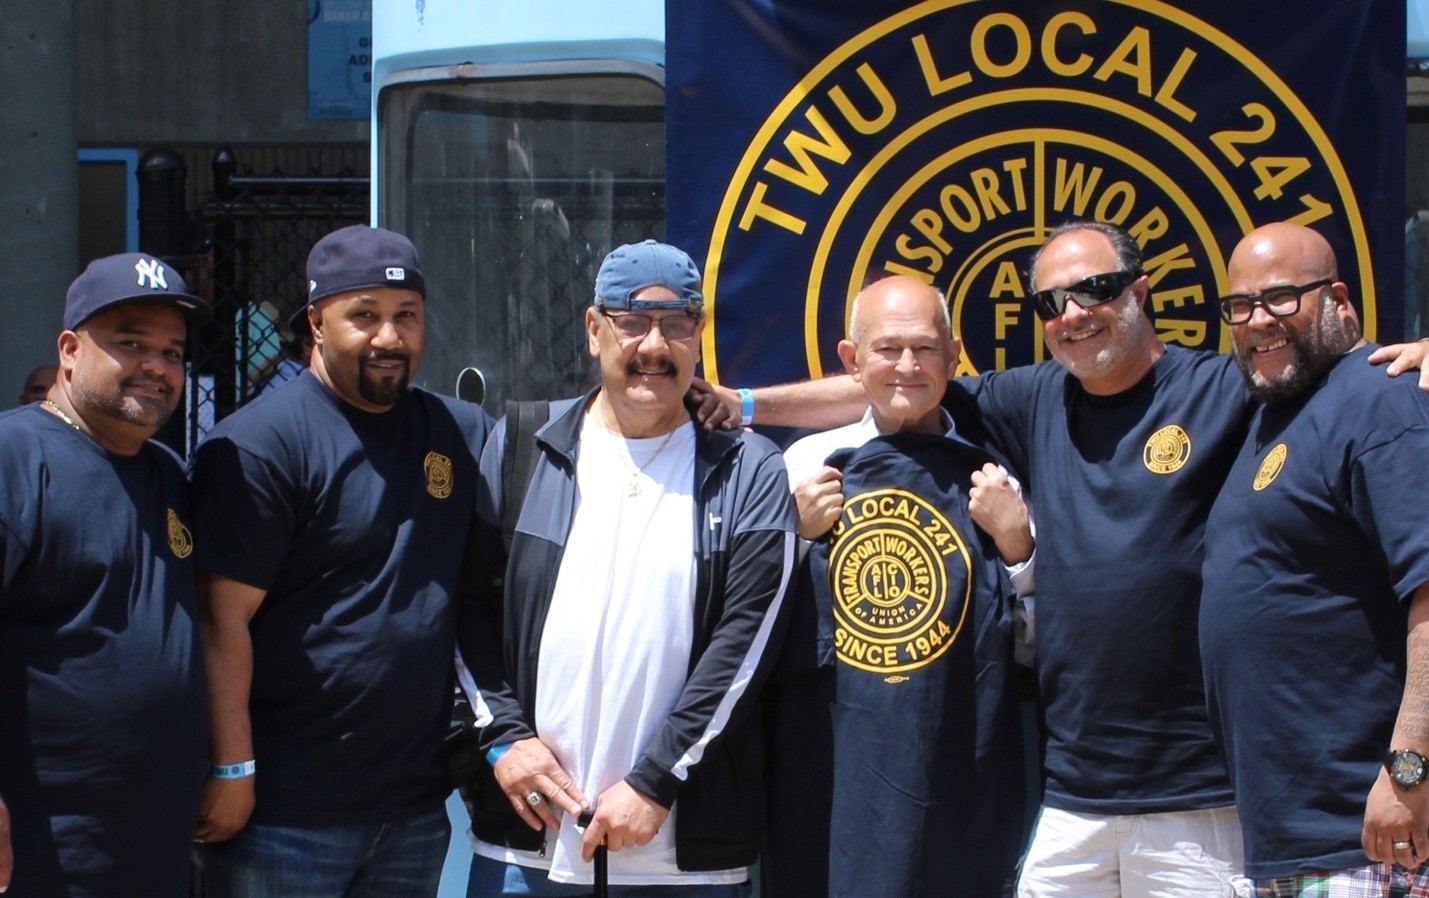 TWU Local 241 leadership and long-term members share a moment at the 75th Anniversary celebration June 22 at Baker Athletics Complex. From left: Alex Molina, President; Scotty Morris, Vice President; Cedilio Maldonado, CUIMC Mechanic A, who started at Columbia in December 1974; Tanveer Iqbal, Manhattanville Public Safety Officer, who started in November 1974, Dino Centrone, Treasurer; and Raymond Torres, Recording Secretary.